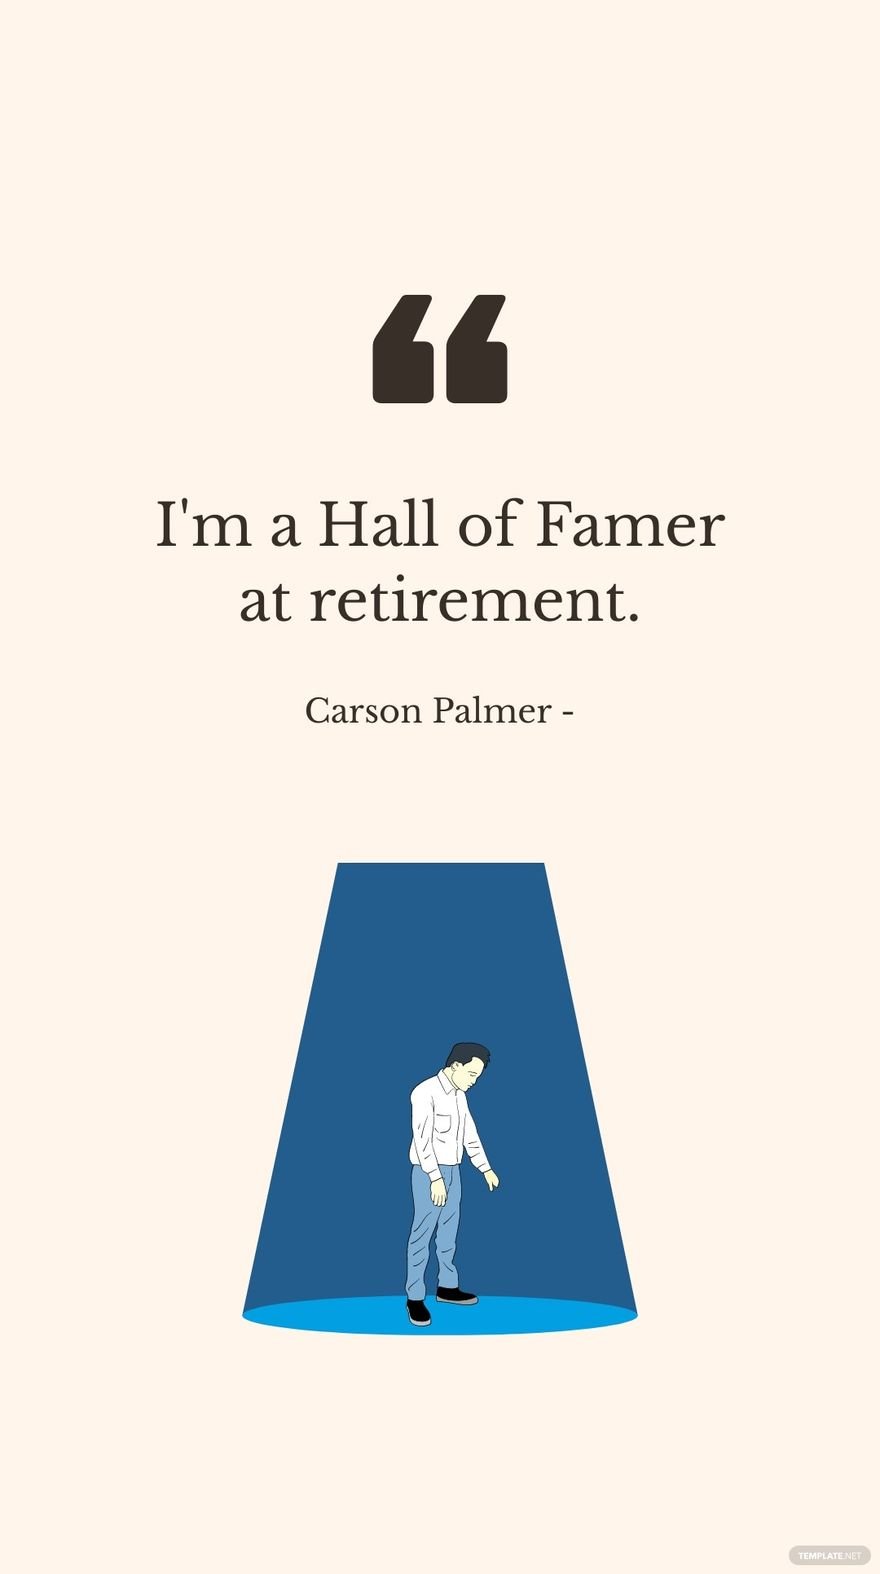 Free Carson Palmer - I'm a Hall of Famer at retirement.